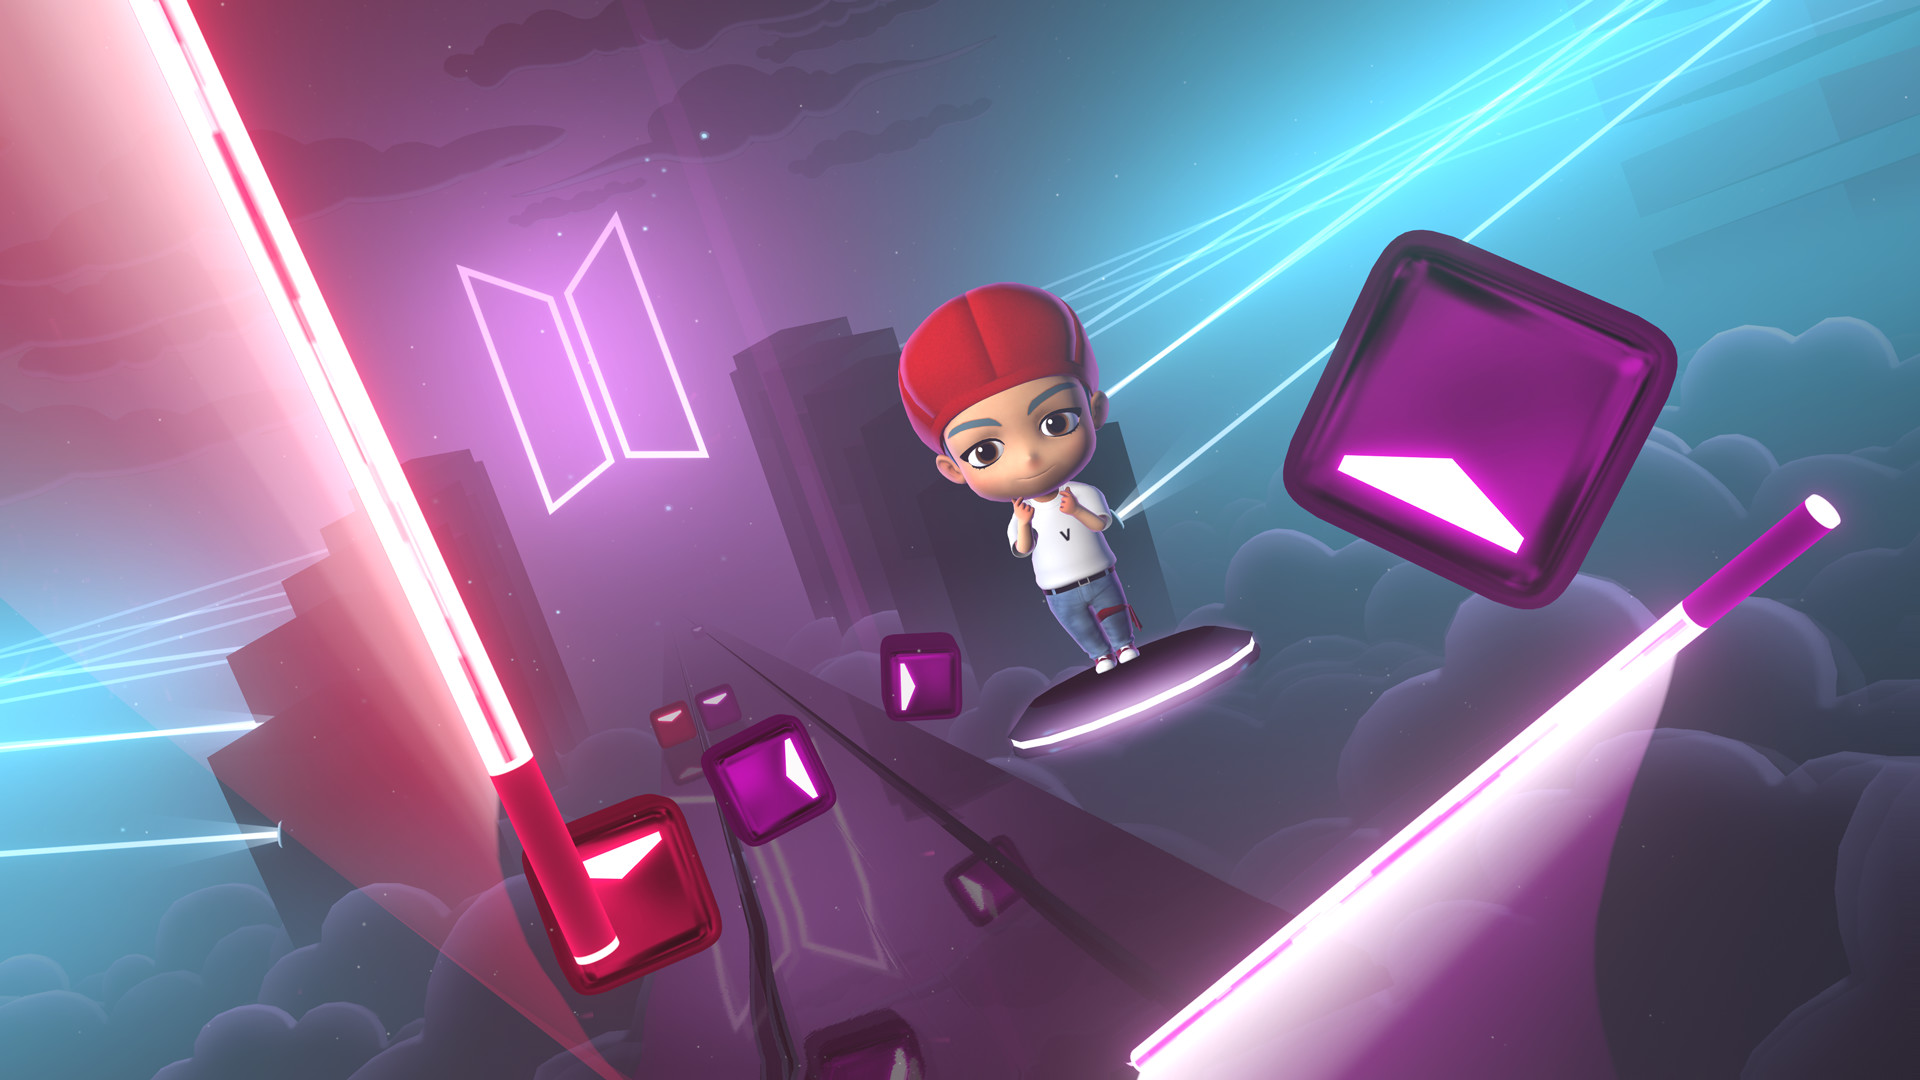 Beat Saber - BTS - "Boy With Luv (feat. Halsey)" Featured Screenshot #1